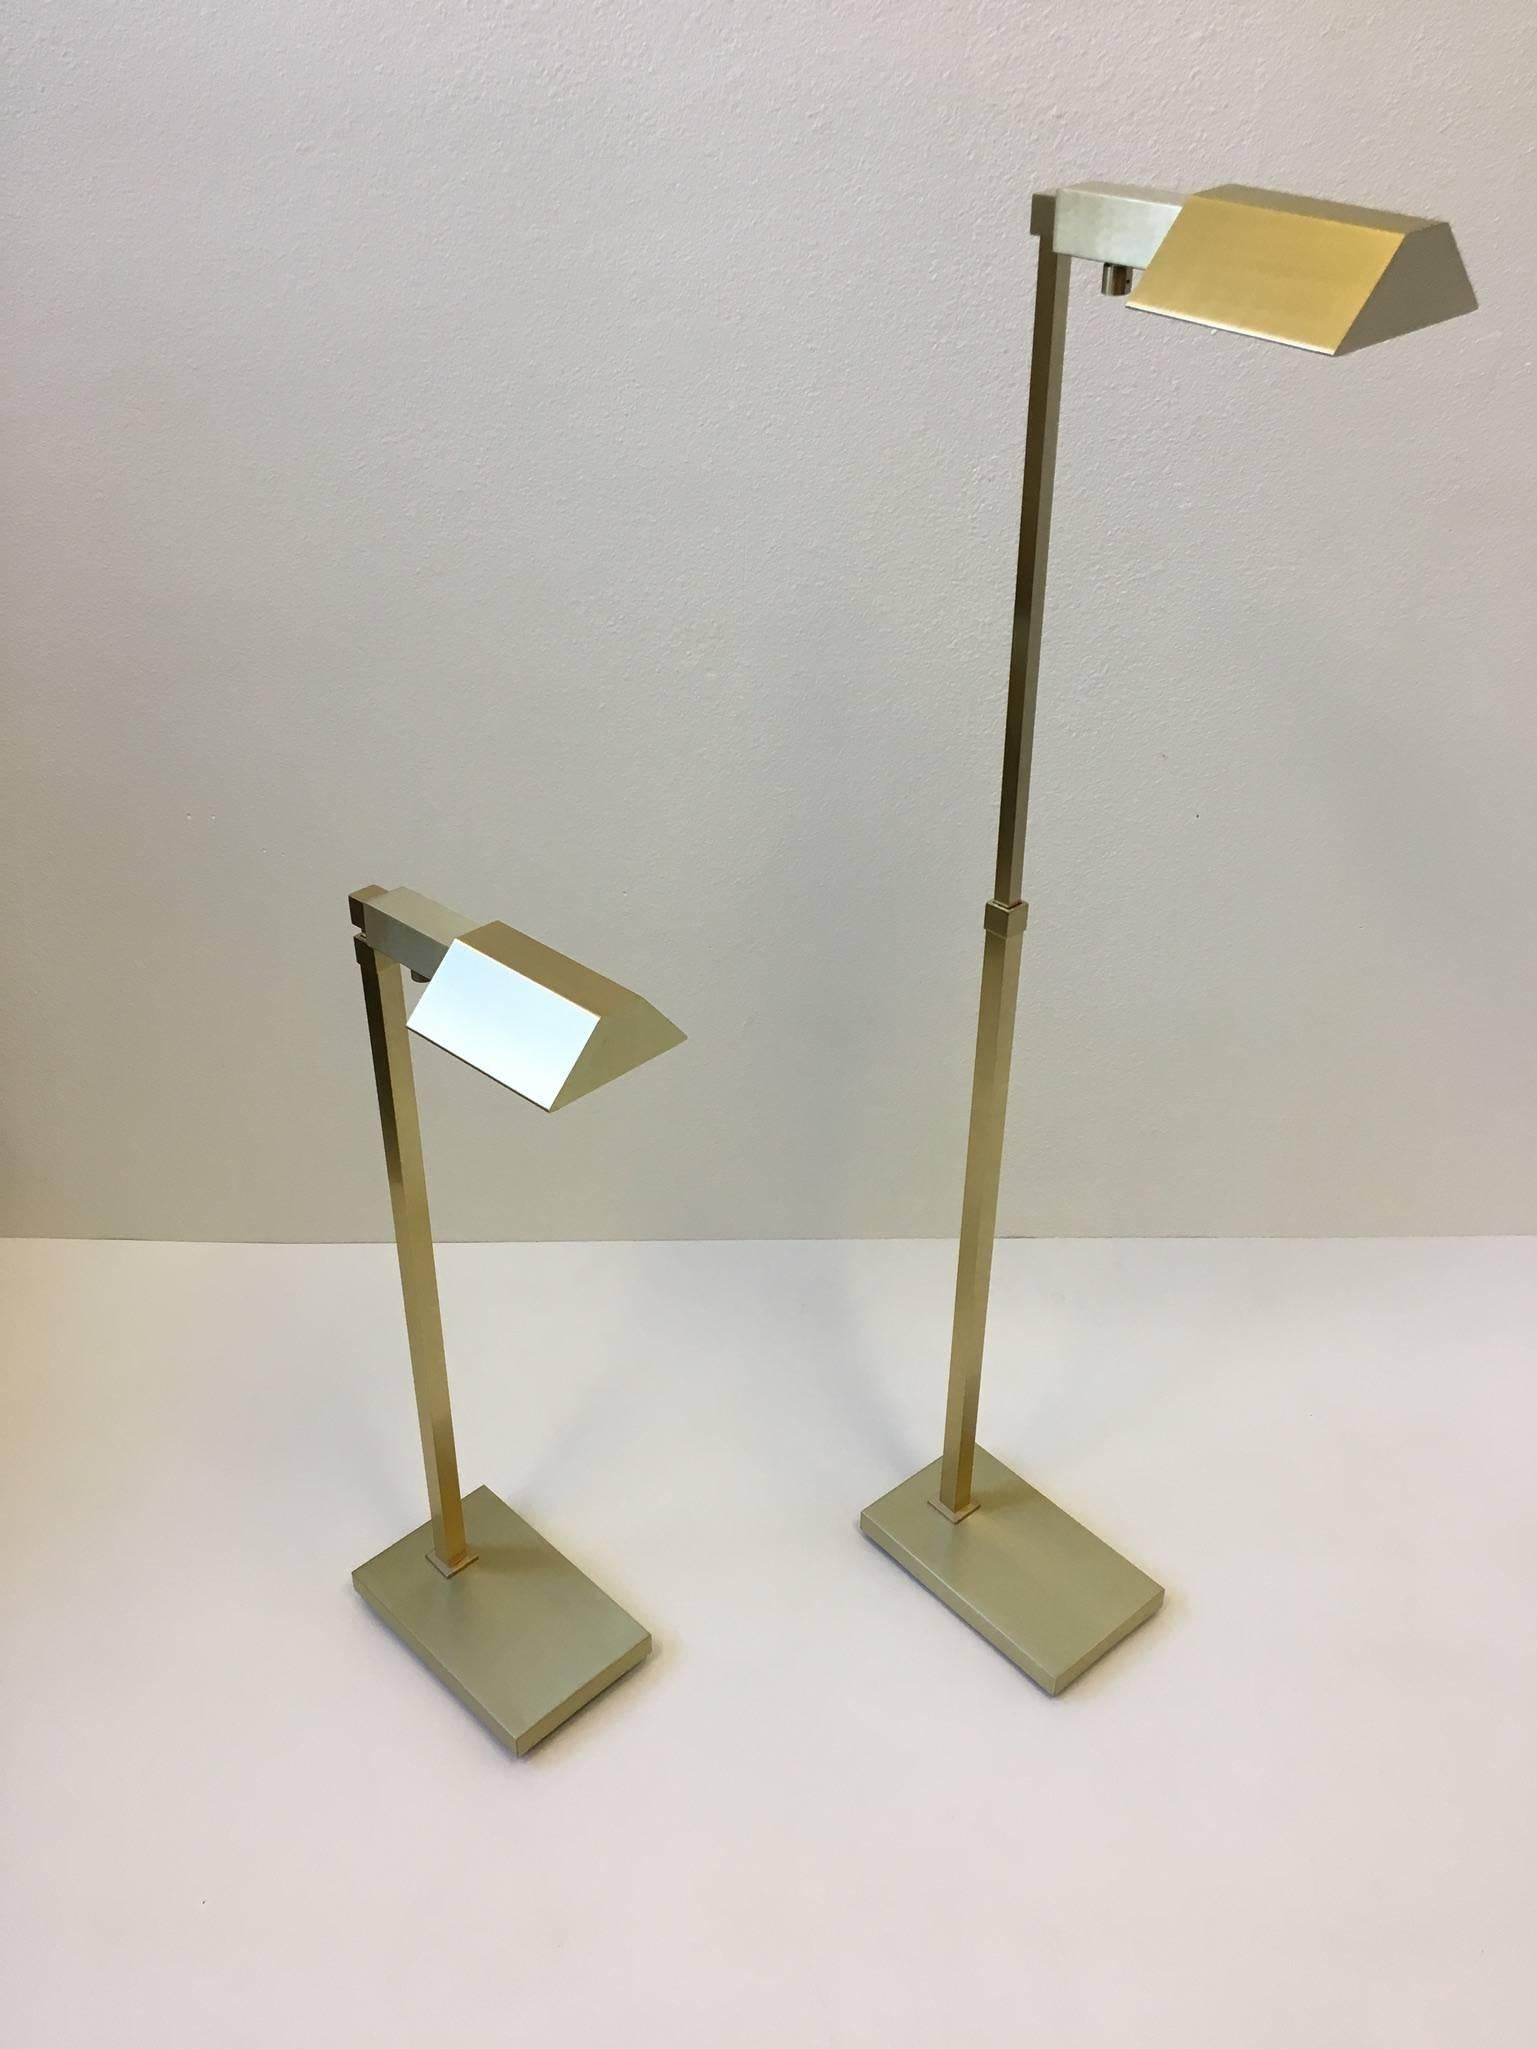 American Pair of Adjustable Brushed Brass Floor Lamps by Casella